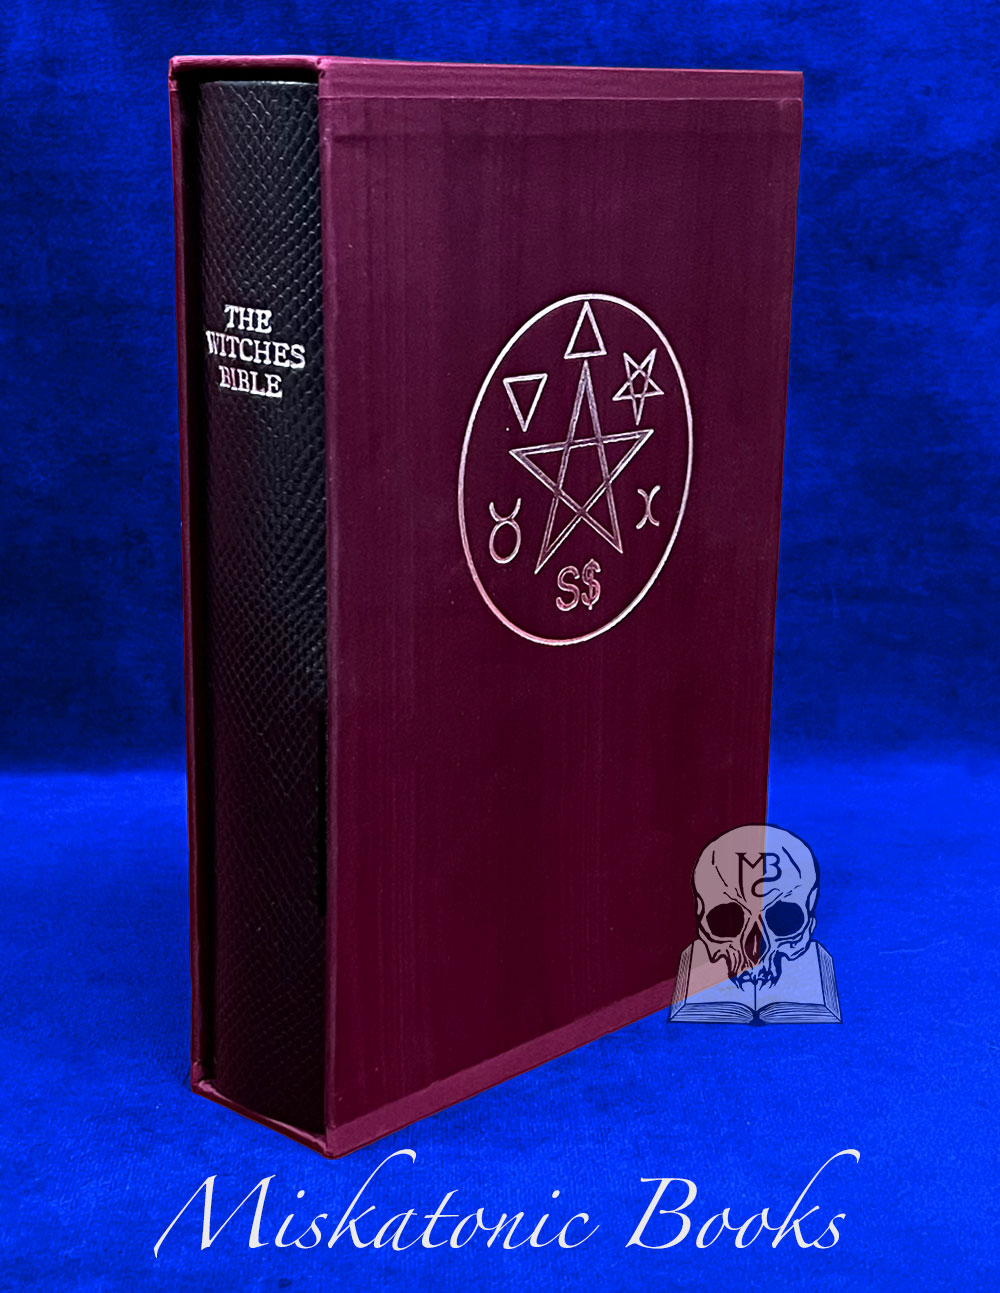 THE WITCHES BIBLE: The Complete Witches' Handbook by Stewart Farrar & Janet Farrar - Deluxe Leather Bound Limited Edition Hardcover in Custom Slipcase